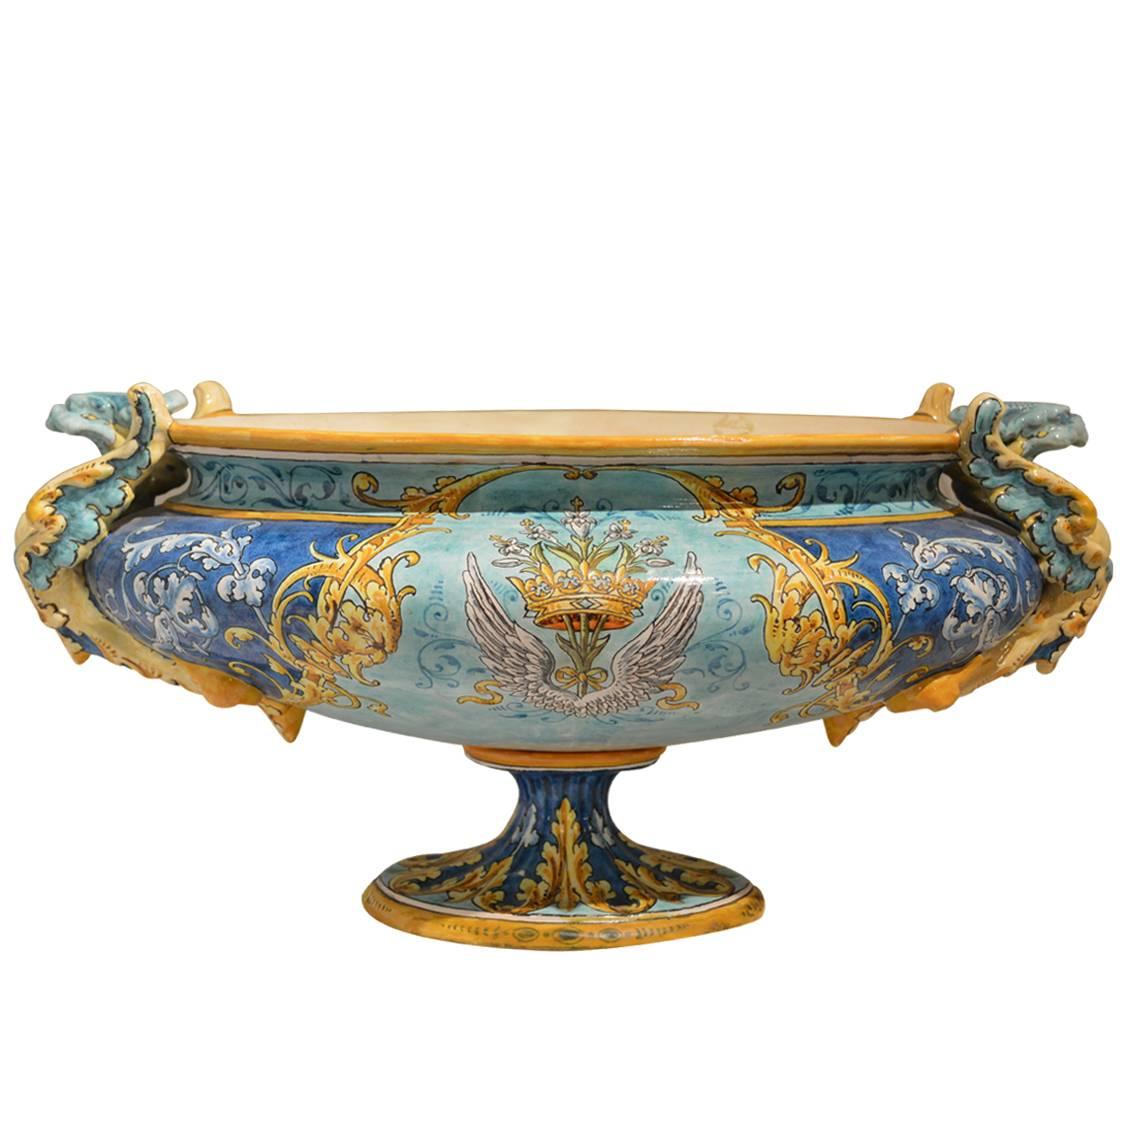 Antique French Hand-Painted Ceramic Centerpiece